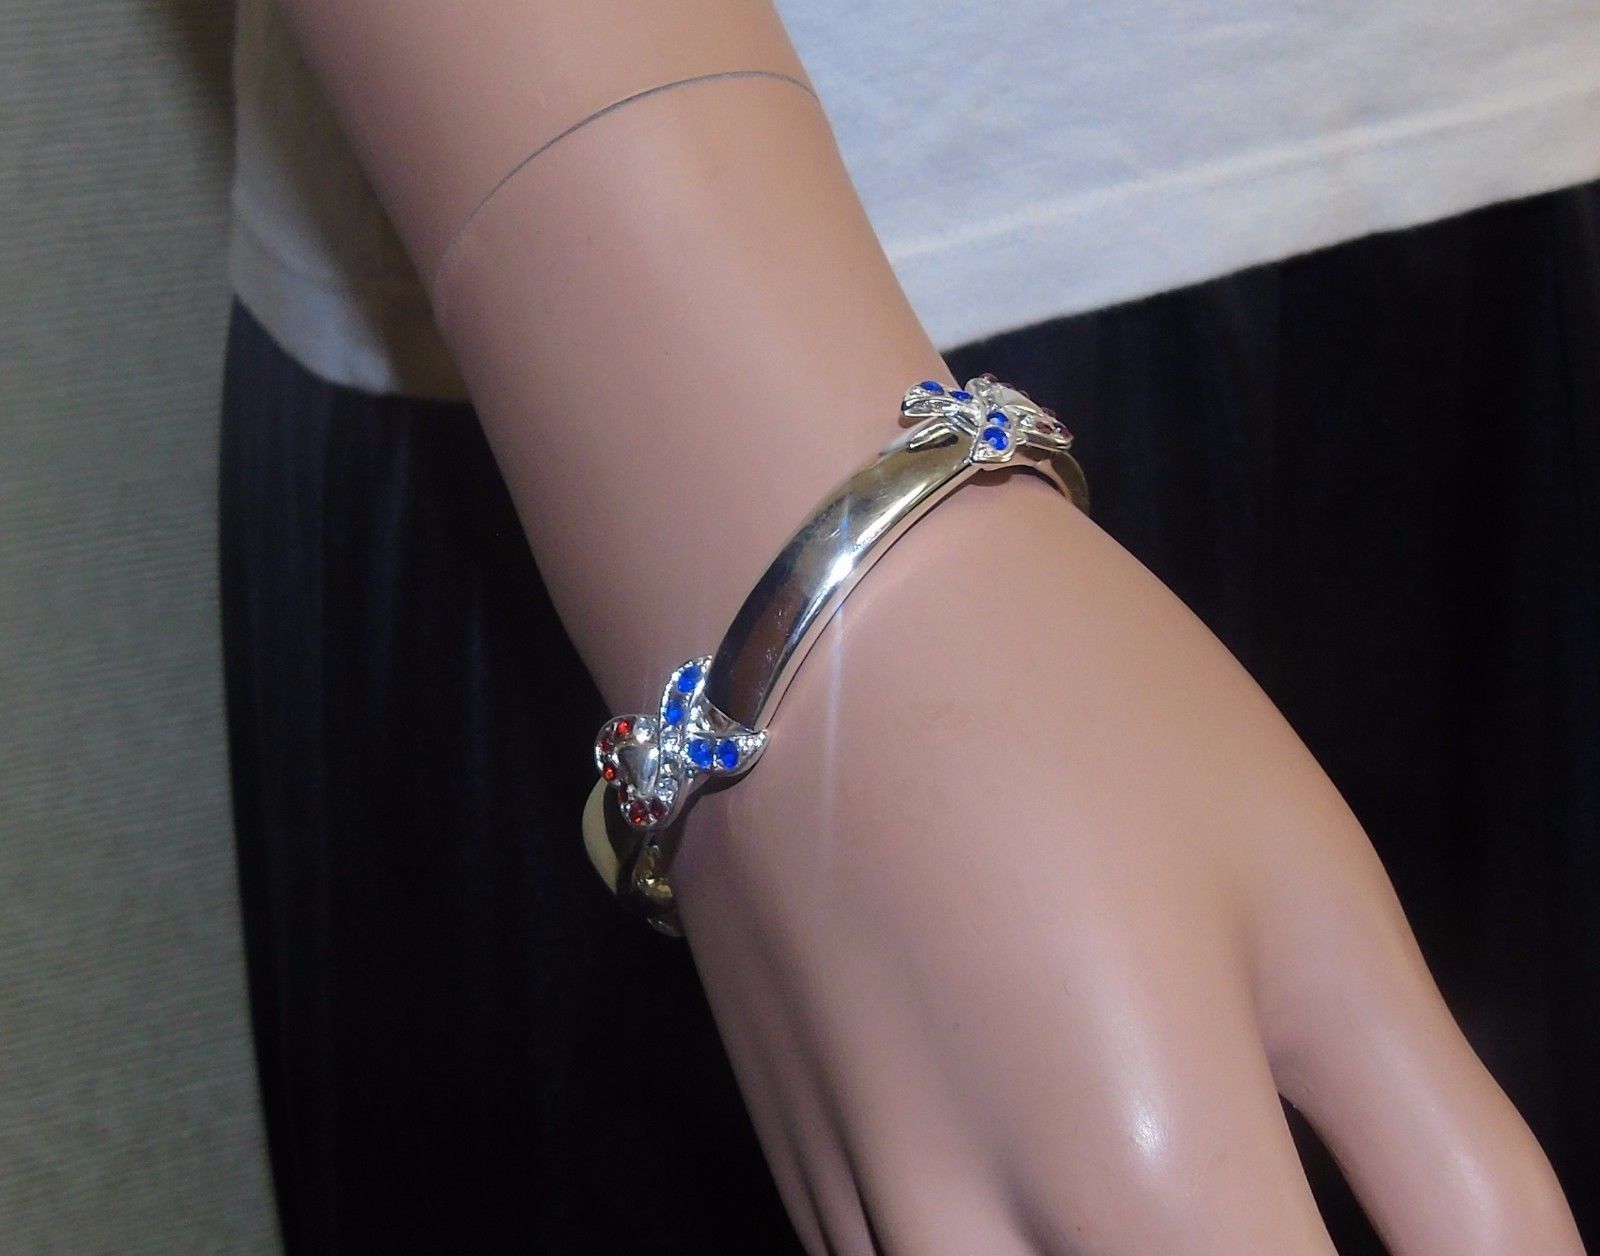 Primary image for Support Ribbon Bracelet ~ Red, White & Blue Gemstones, Polished Silver-Tone Band